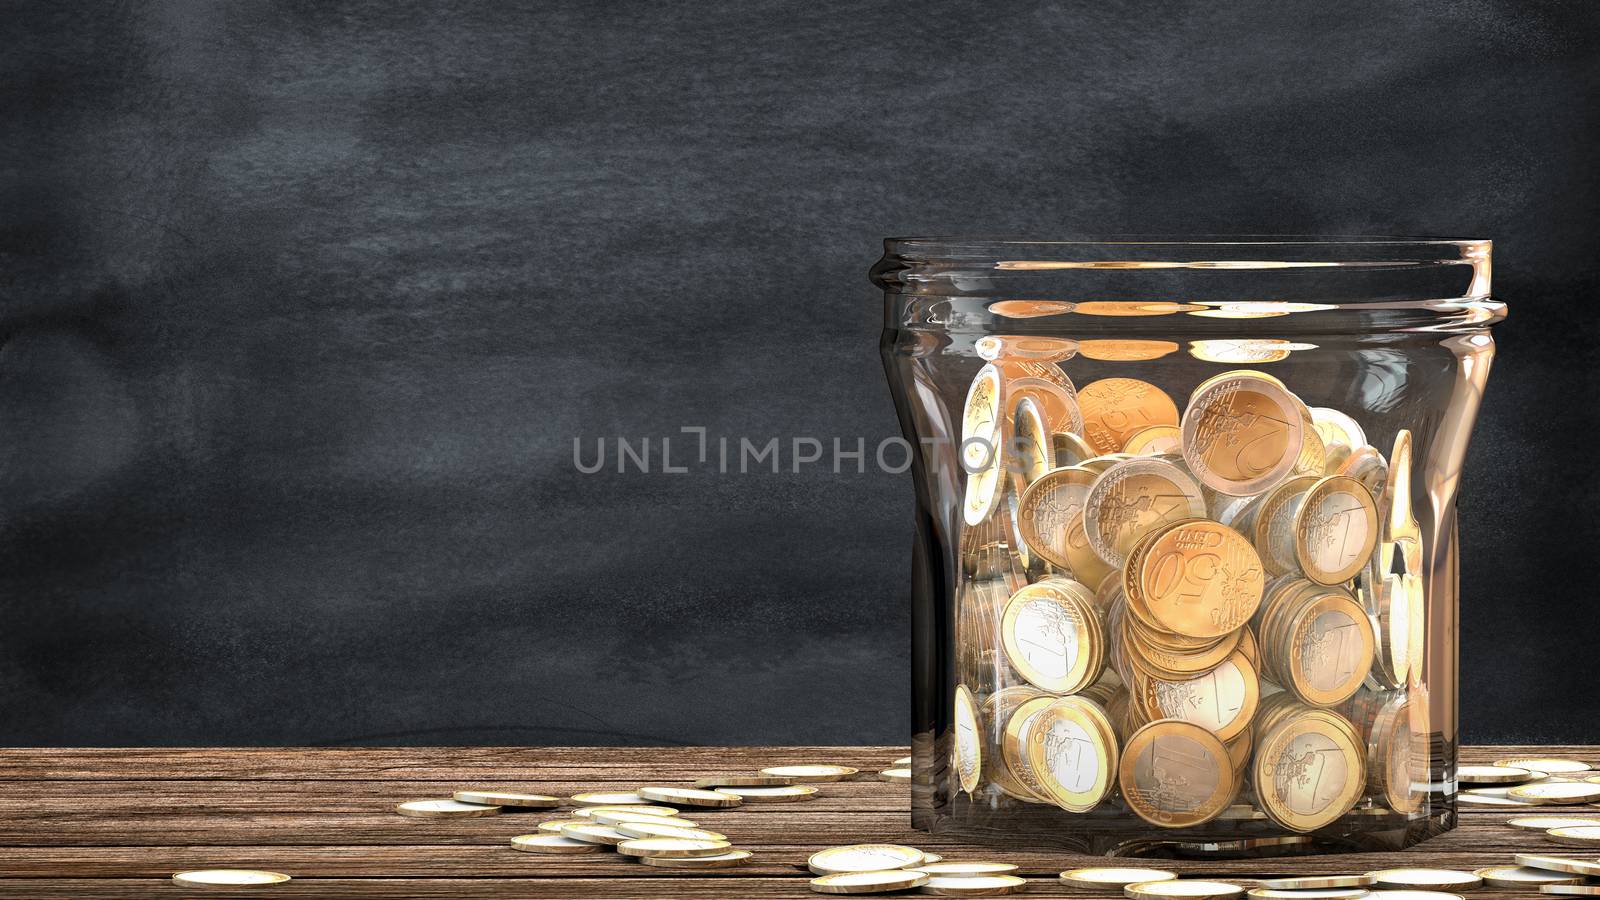 Mason jar full of tossed coins. This illustration is a metaphor for financial saving. 3D render.